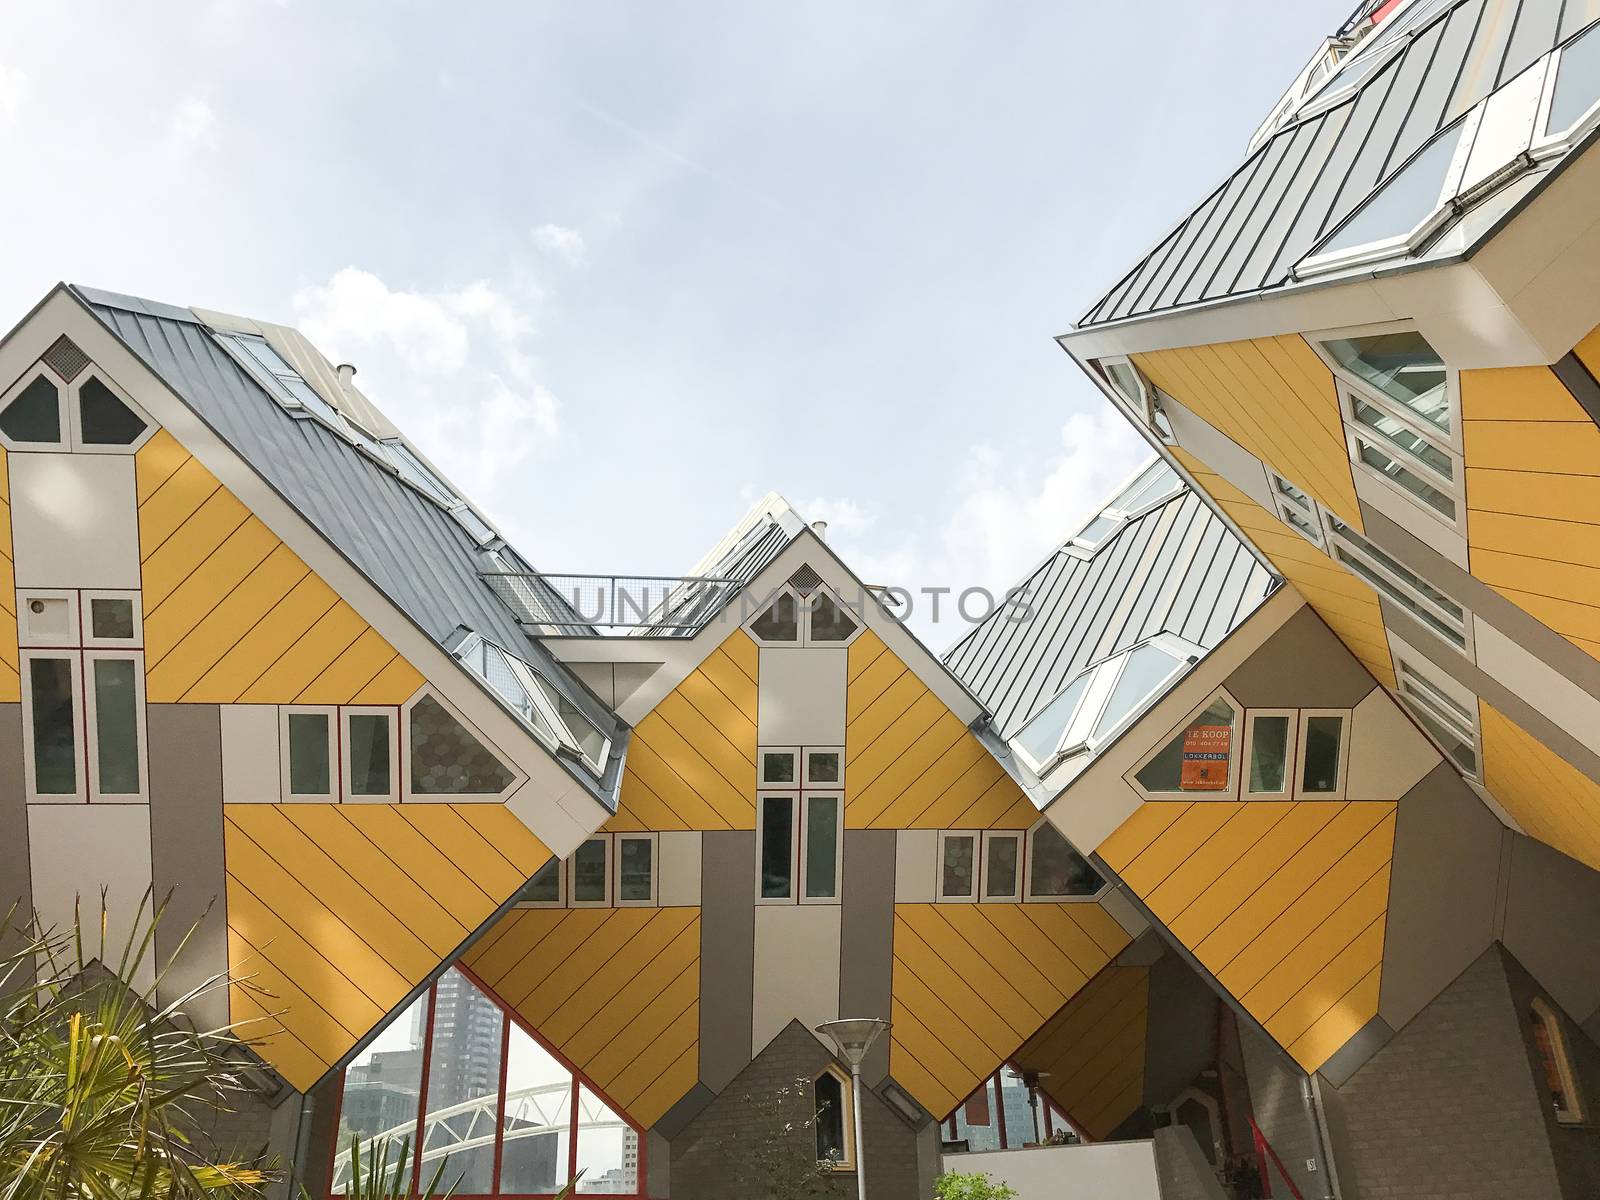 Cube houses (Kubuswoningen) are a set of innovative houses built in Rotterdam designed by architect Piet Blom